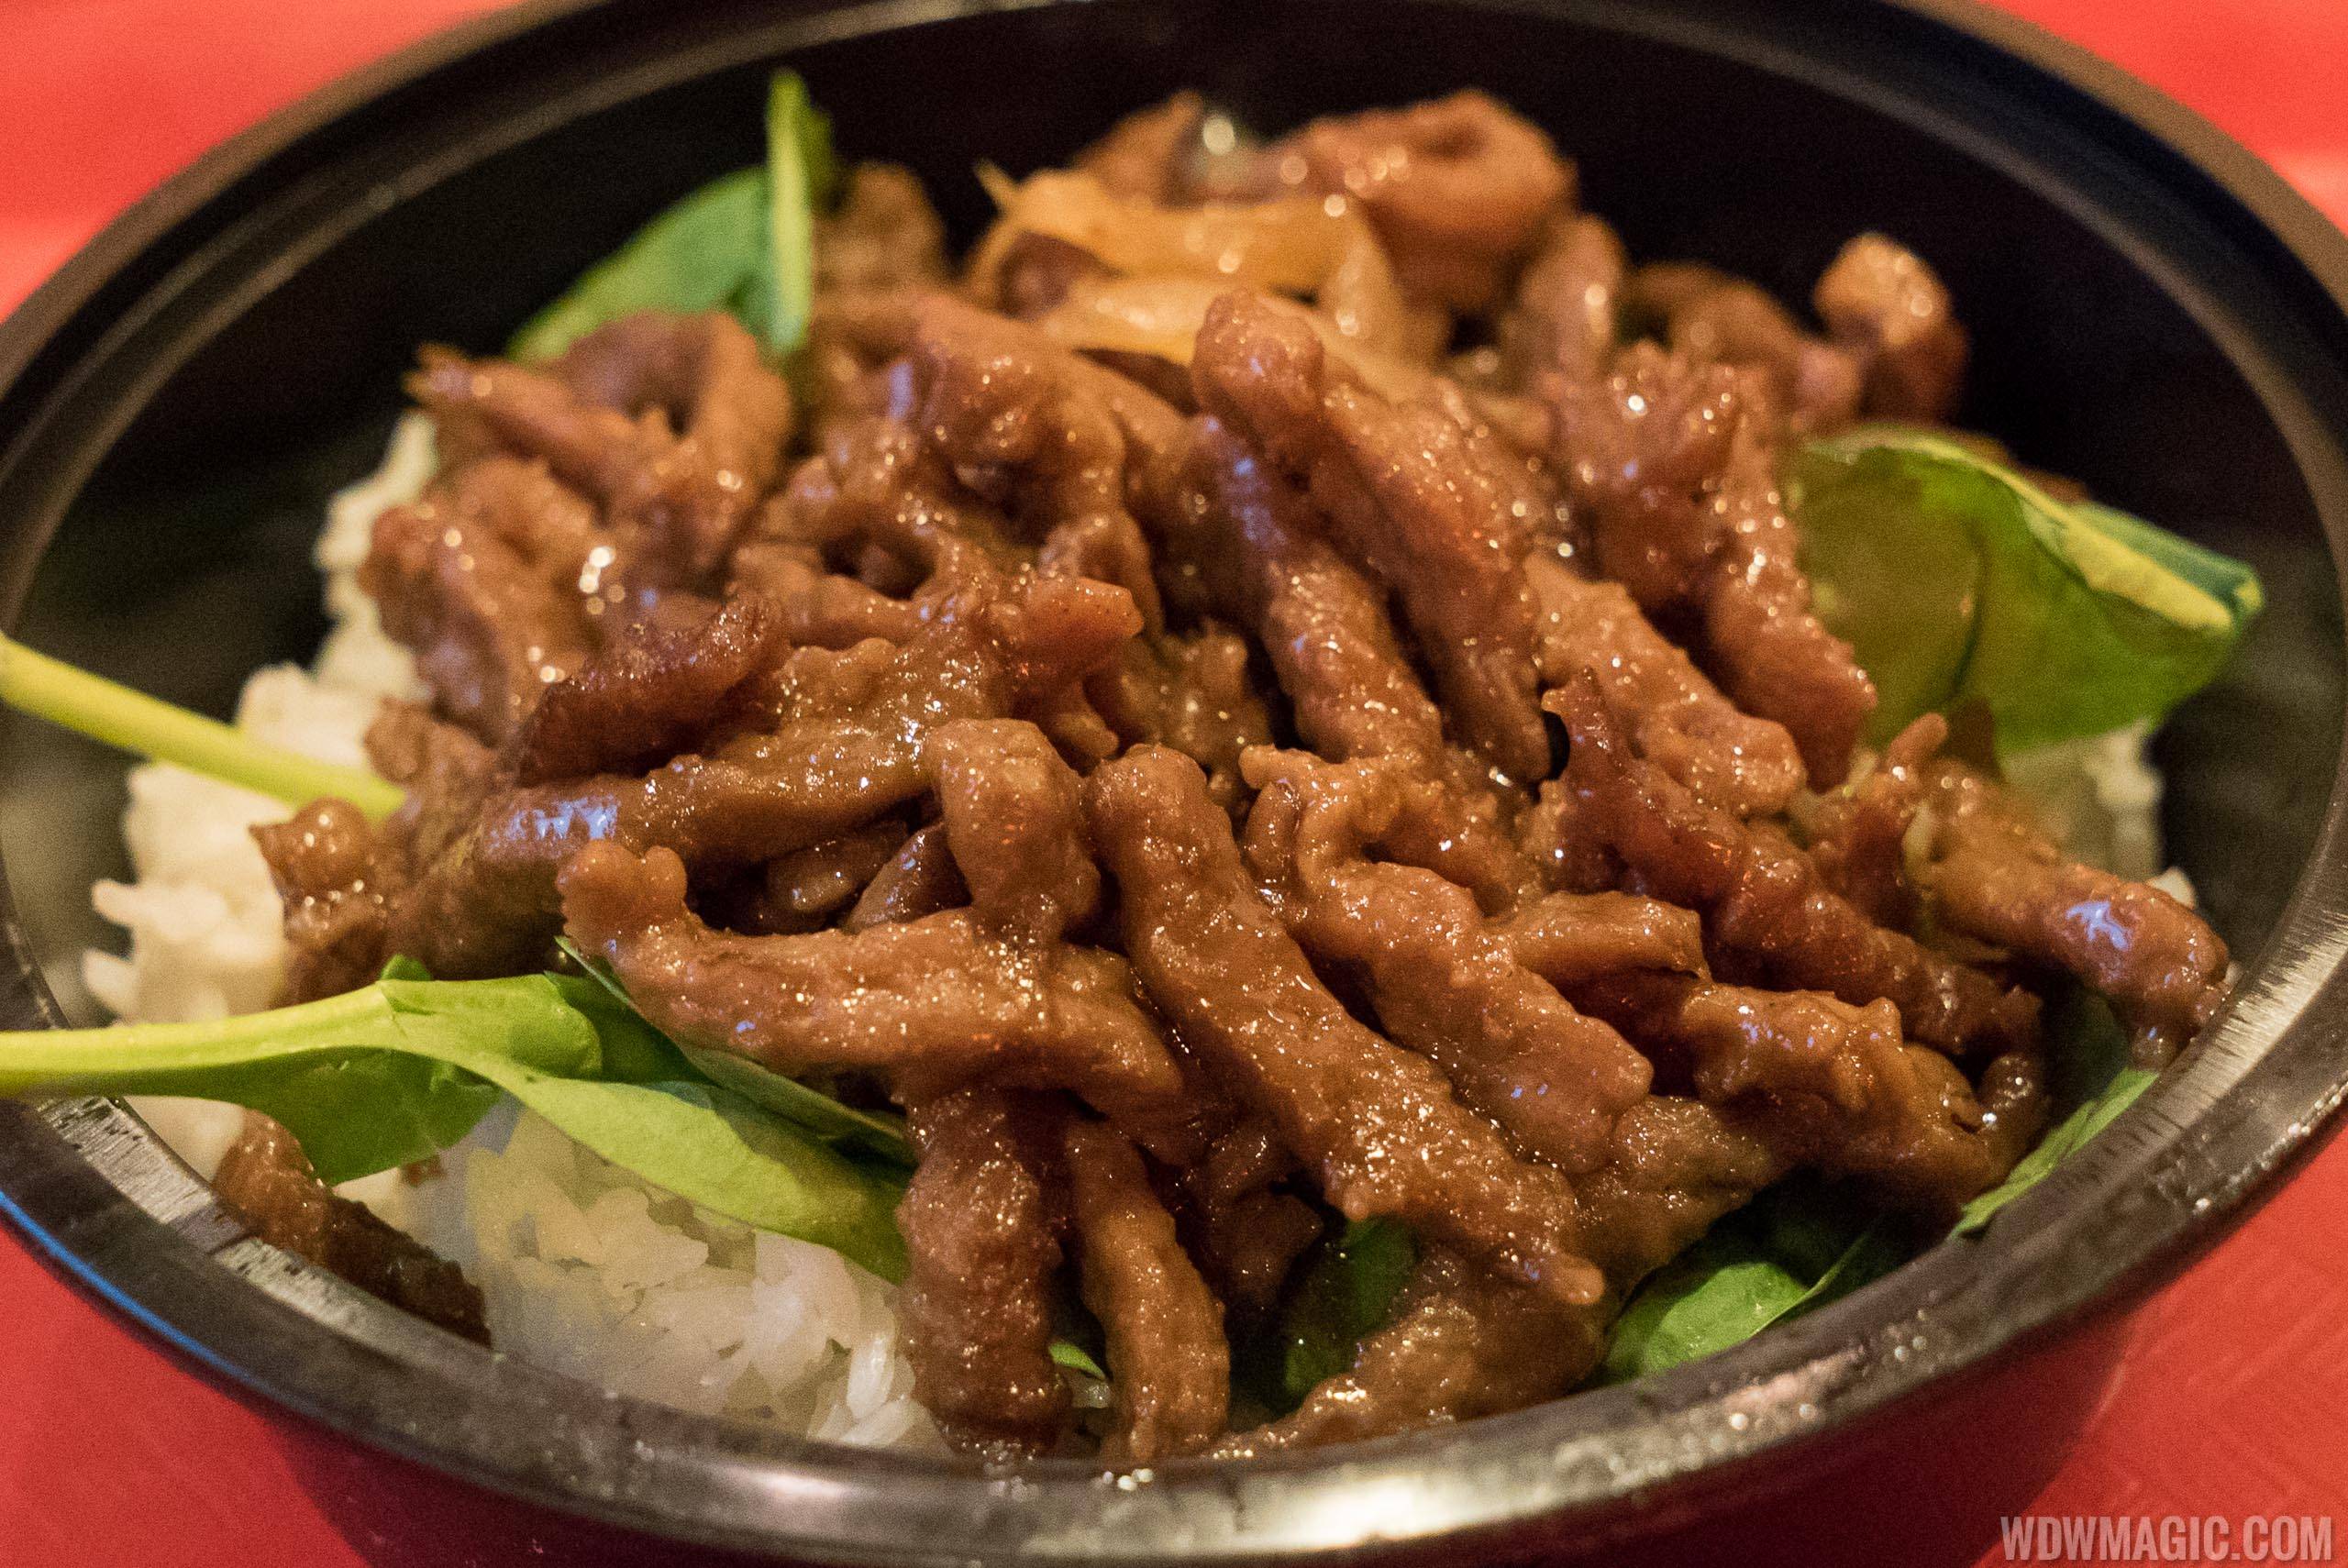 Lotus Blossom Cafe - Beef Rice Bowl